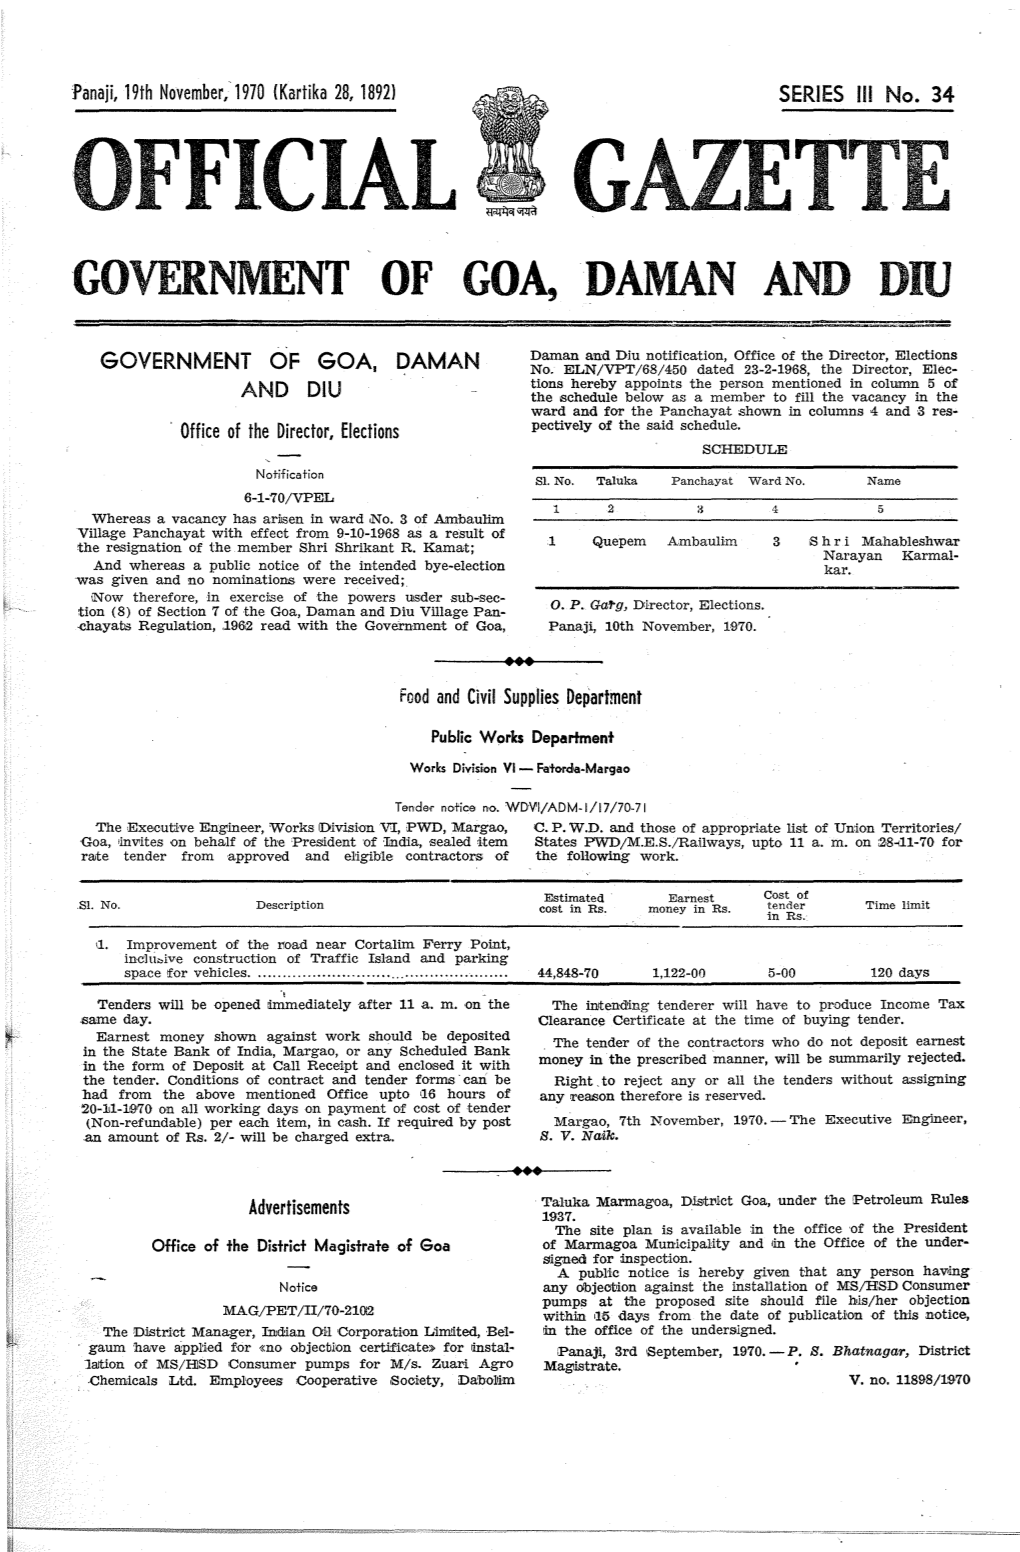 Official G Ette Government of Goa,Daman and Diu